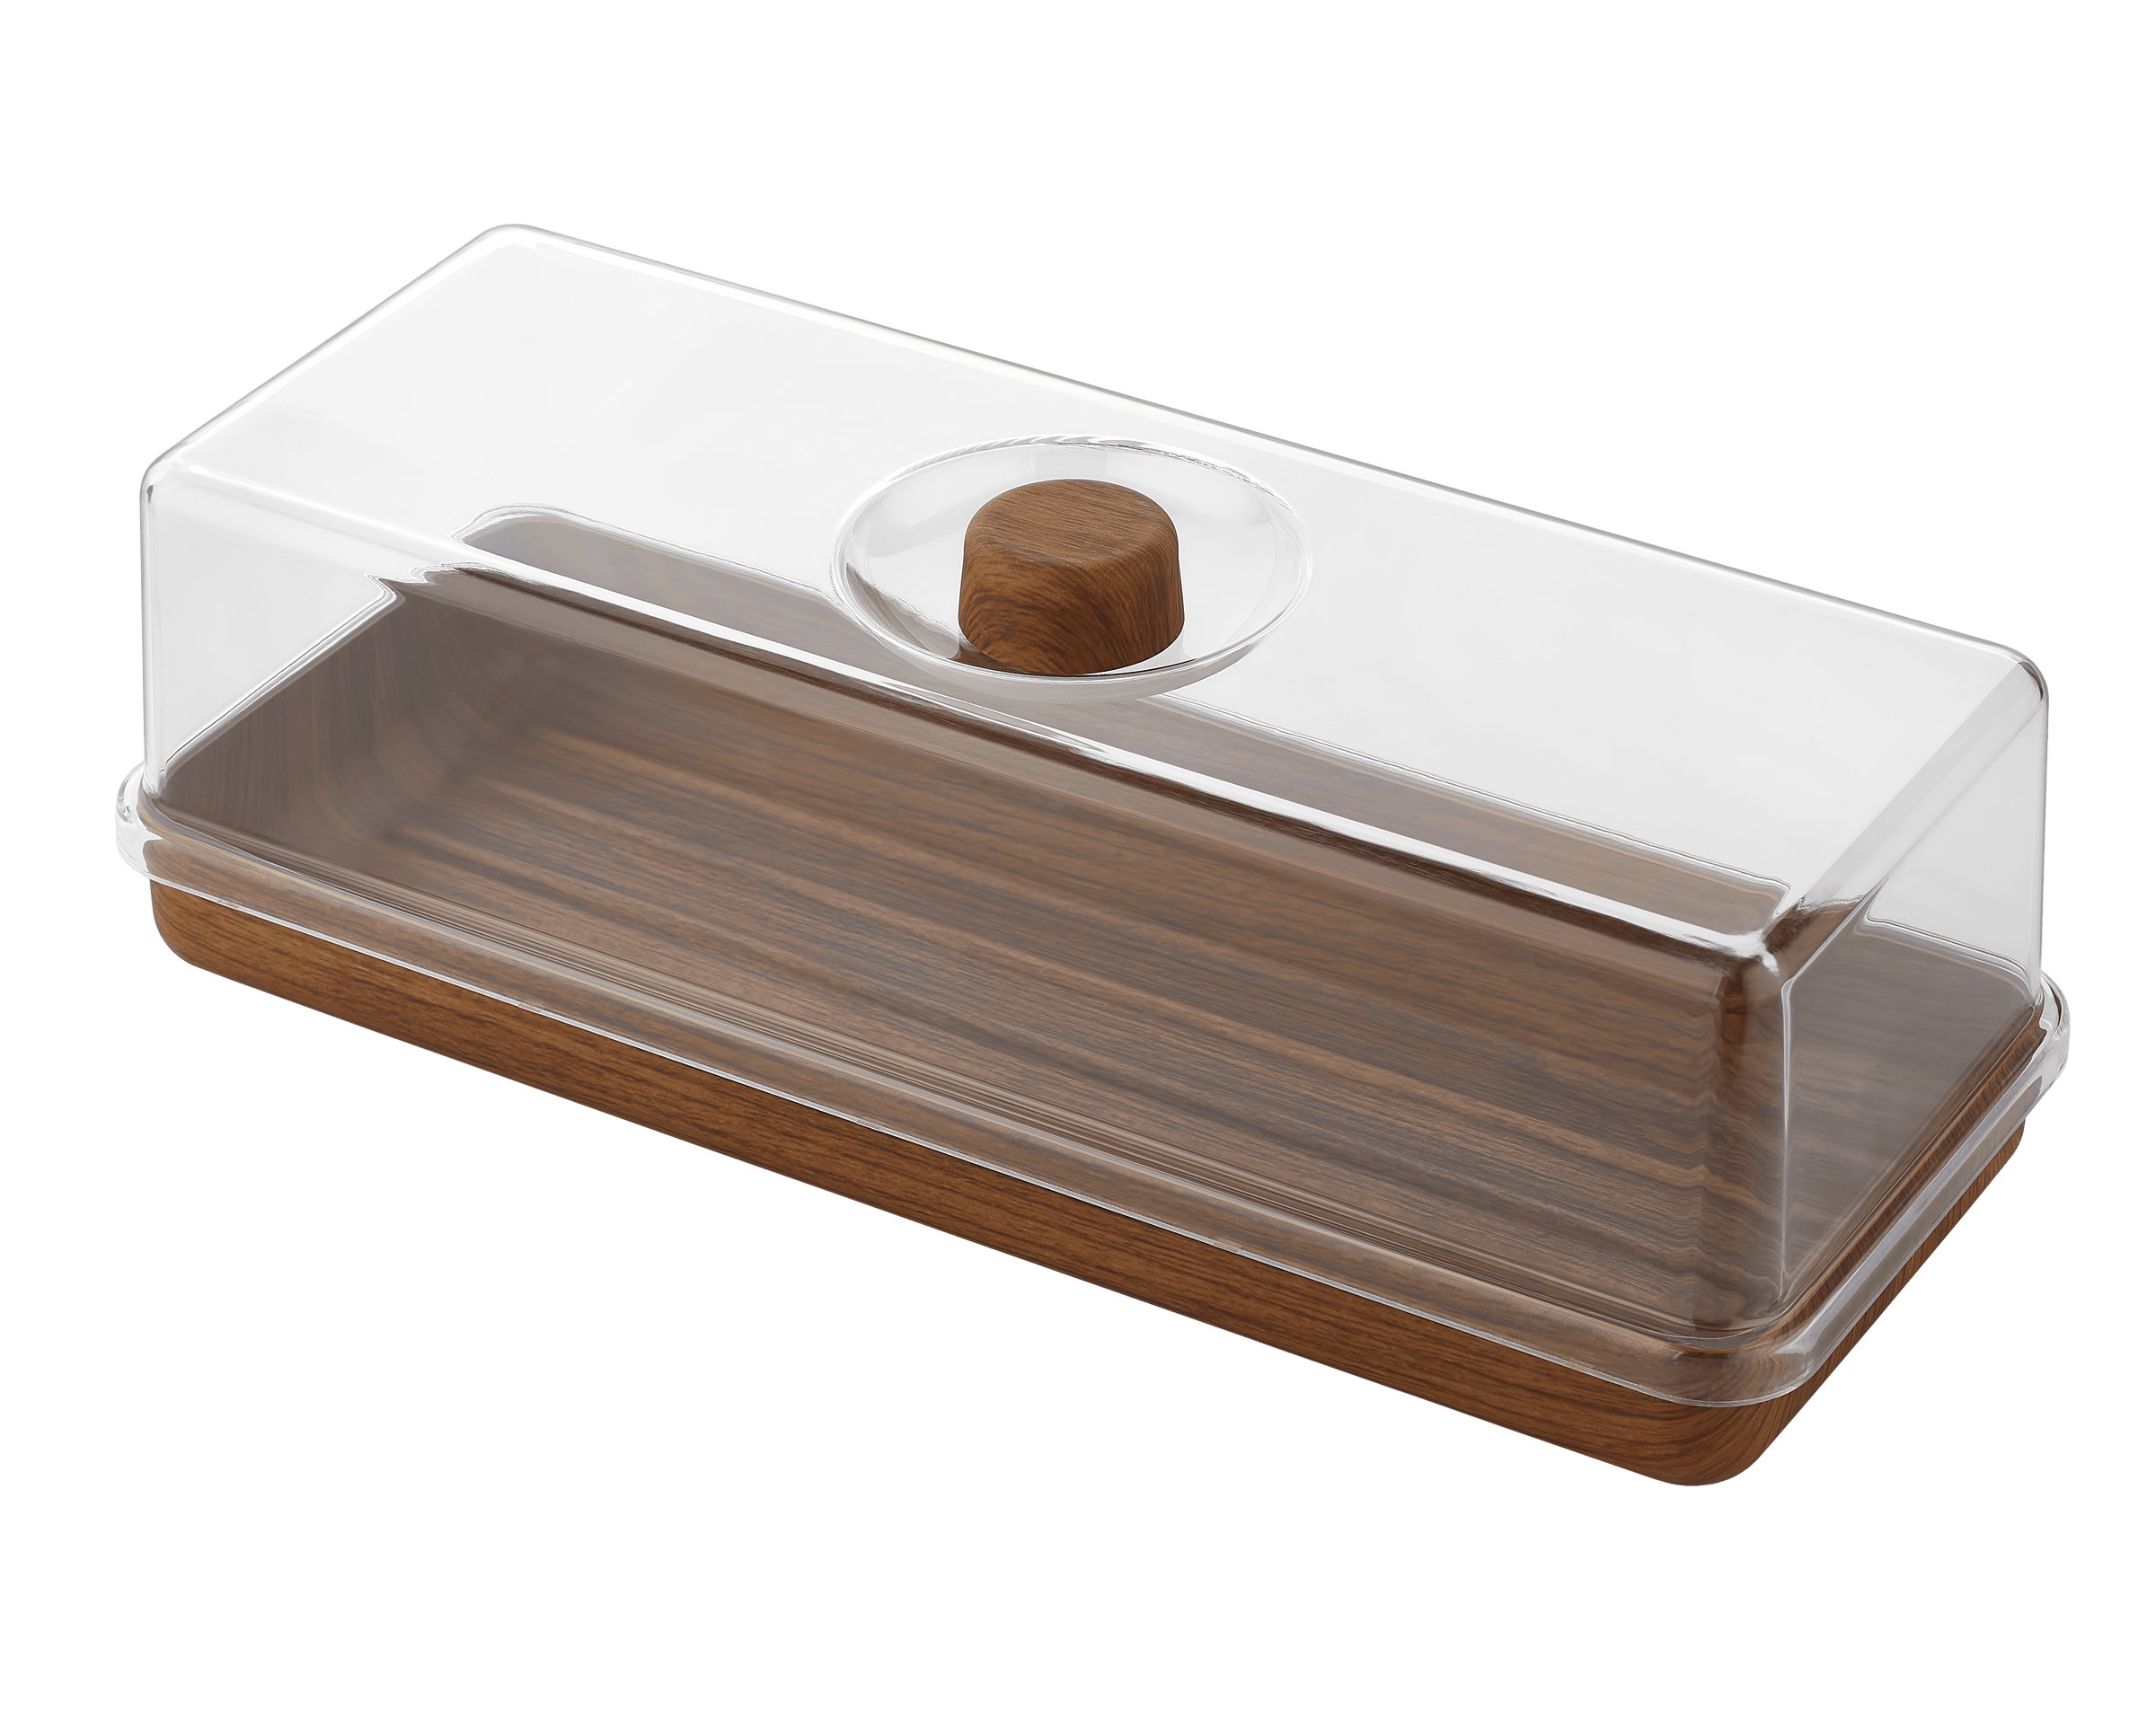 Luxe Party Mahogany Collection Bread and Cake Tray with Cover - Wood